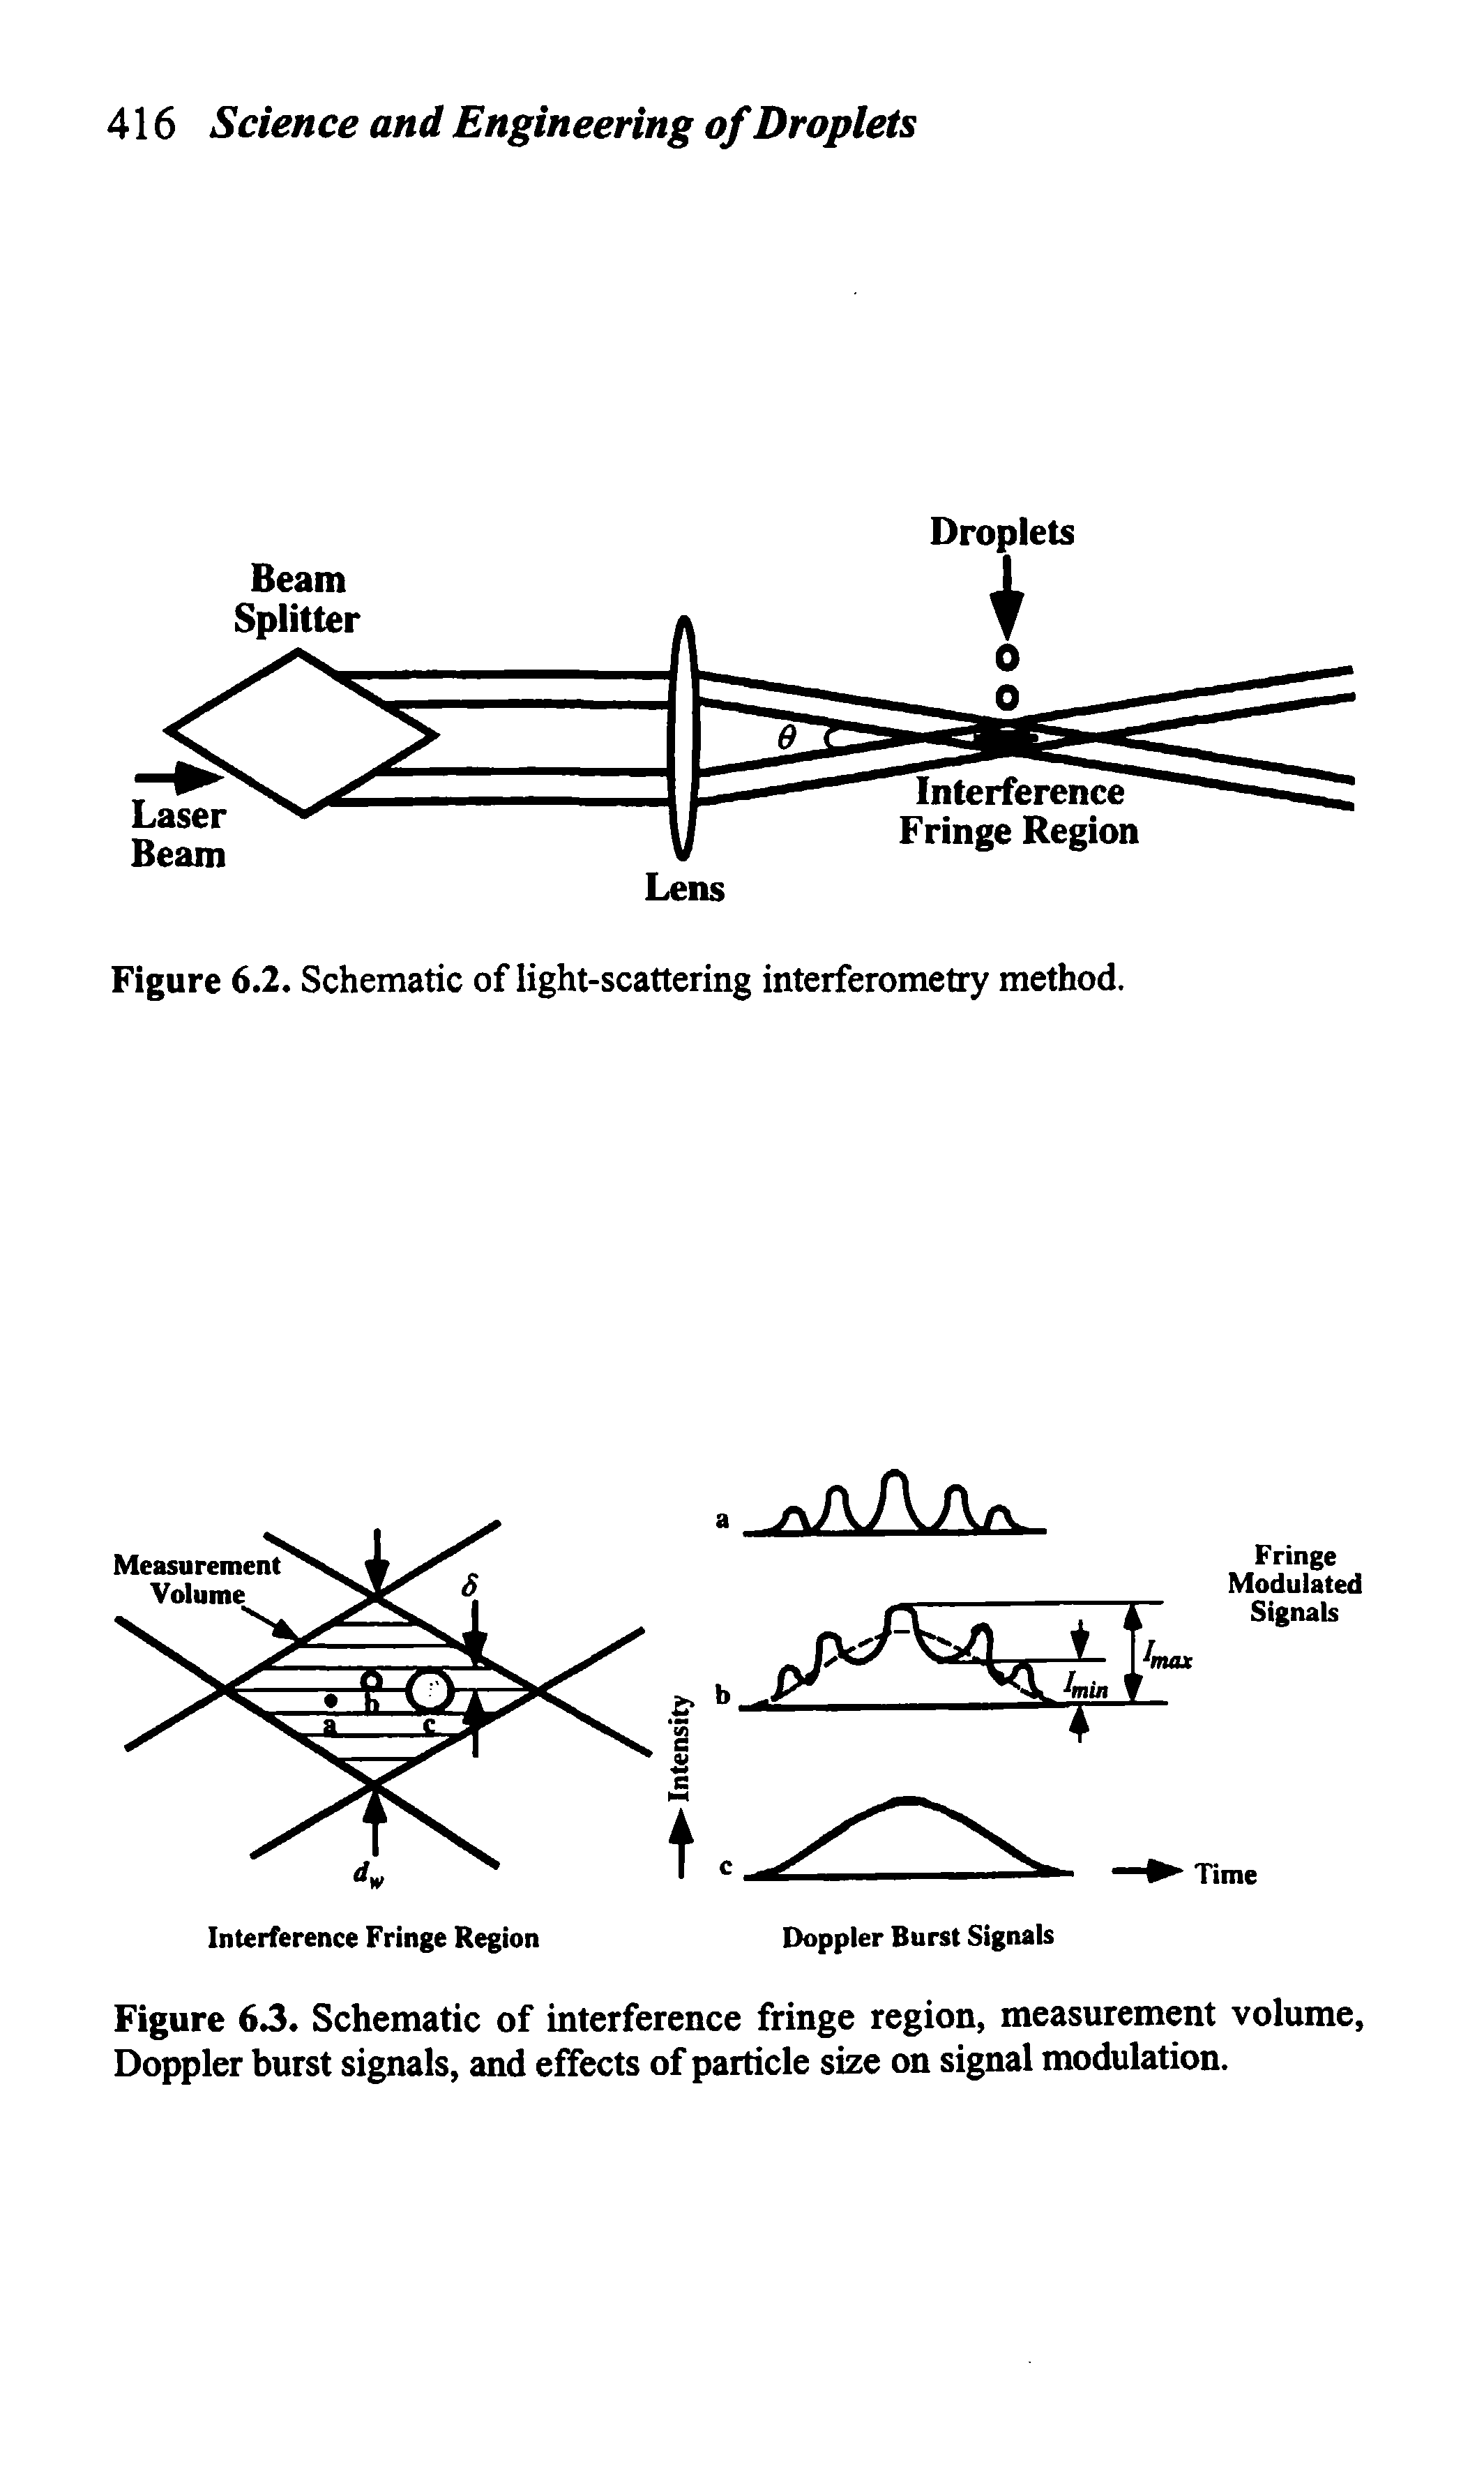 Figure 6.3. Schematic of interference fringe region, measurement volume, Doppler burst signals, and effects of particle size on signal modulation.